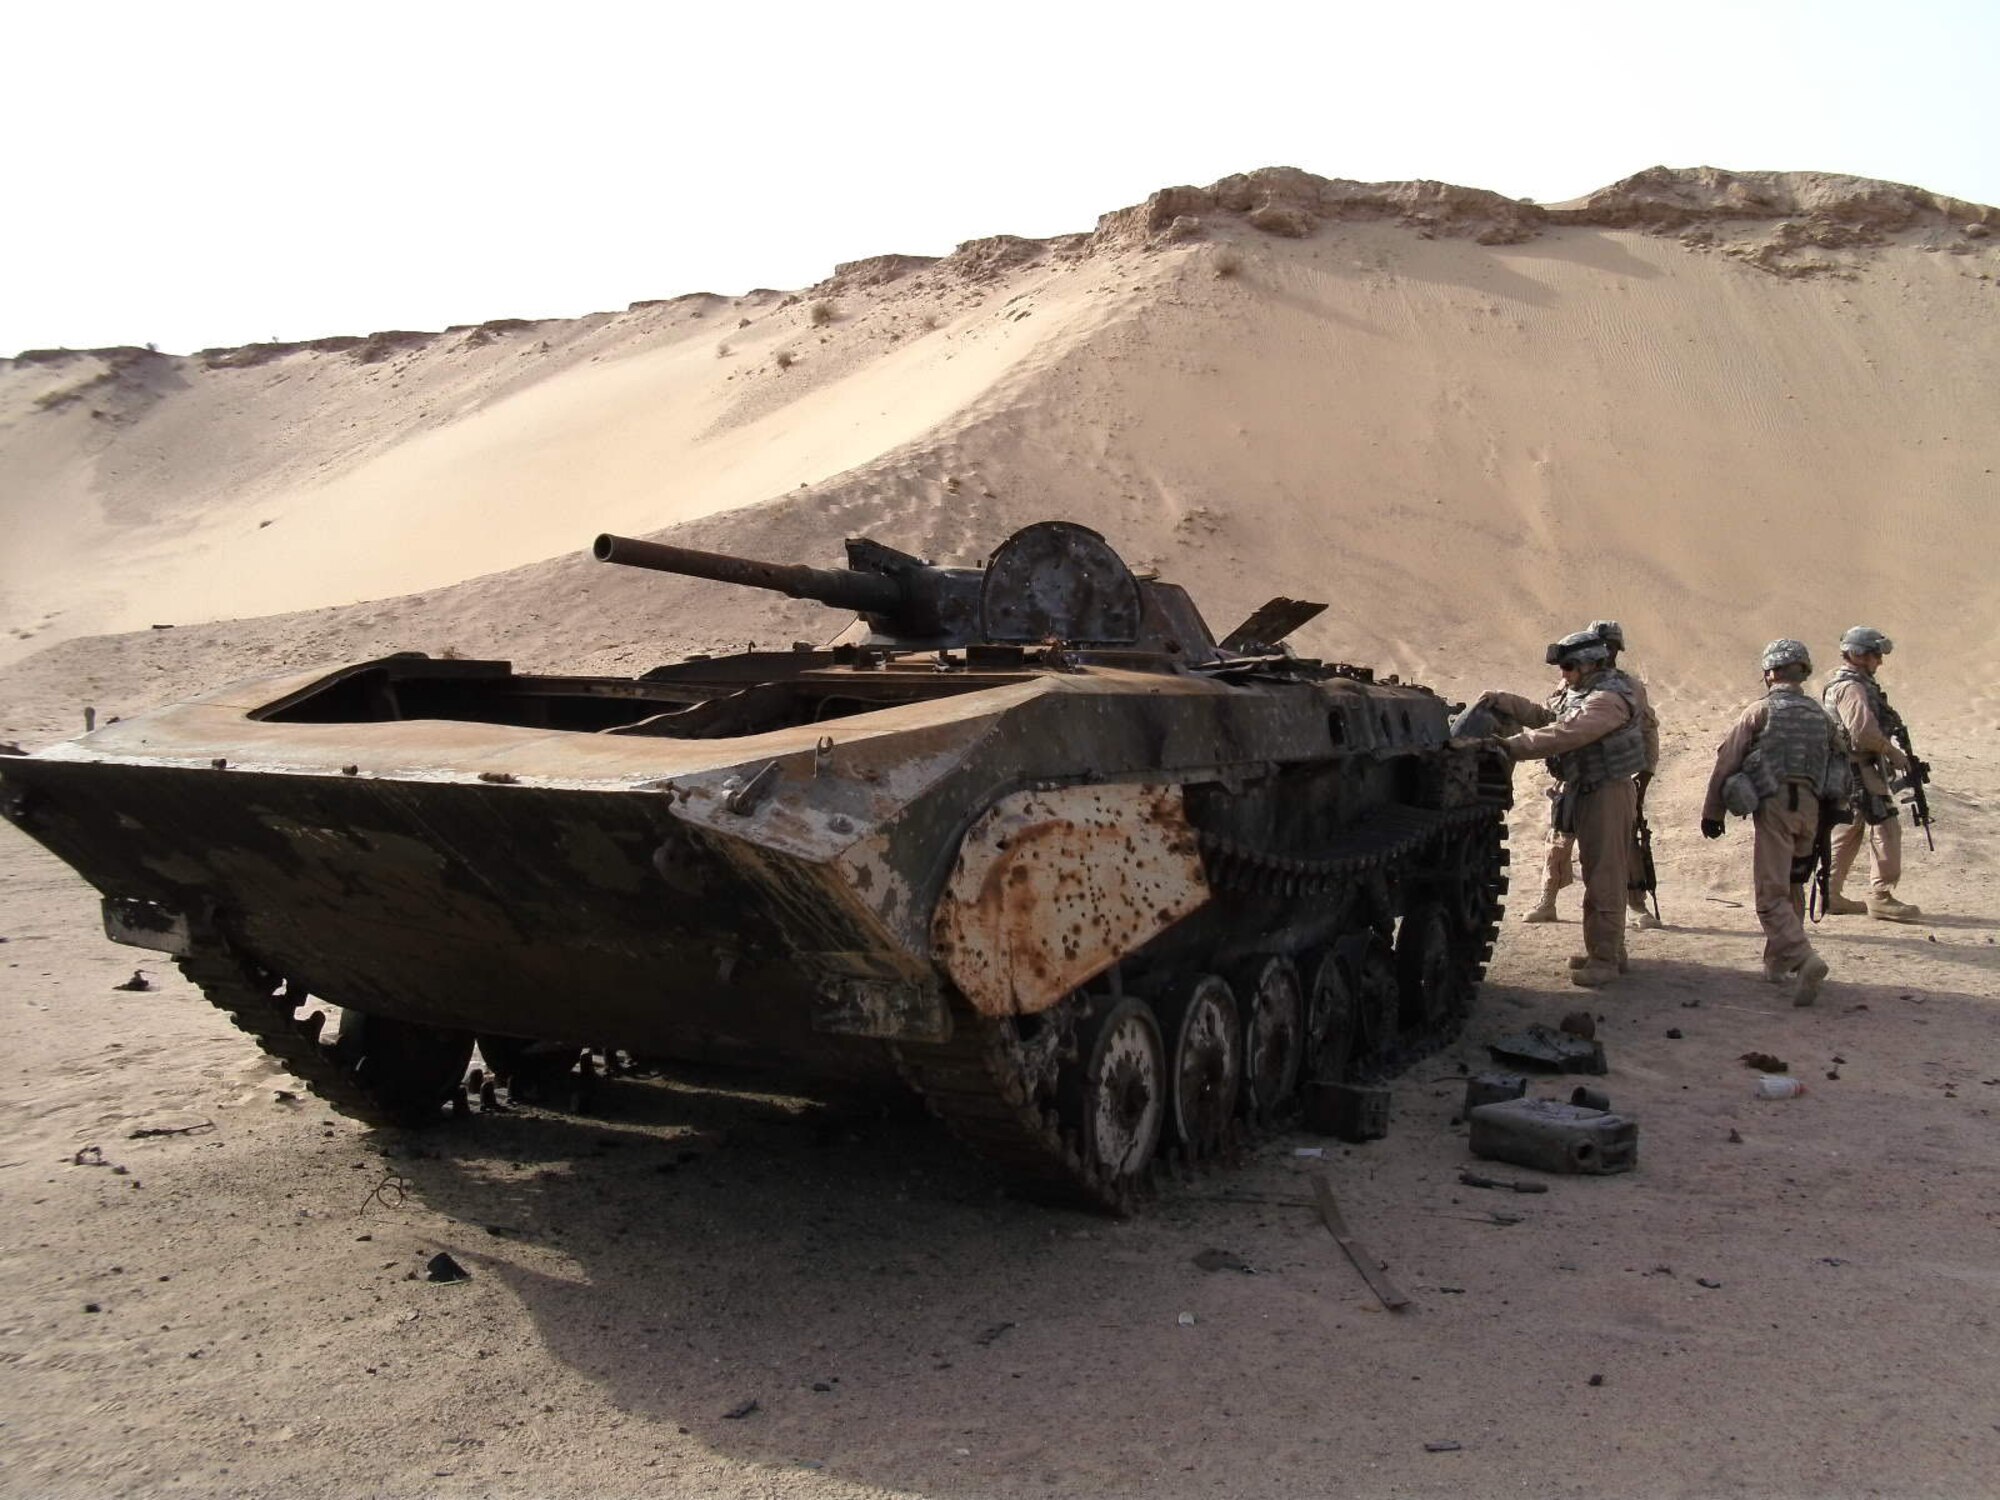 Security forces members get ready to conduct proficiency training on a destroyed Armored Personnel Carrier in a canyon range two miles north of their home base. (U.S. Air Force courtesy photo)       